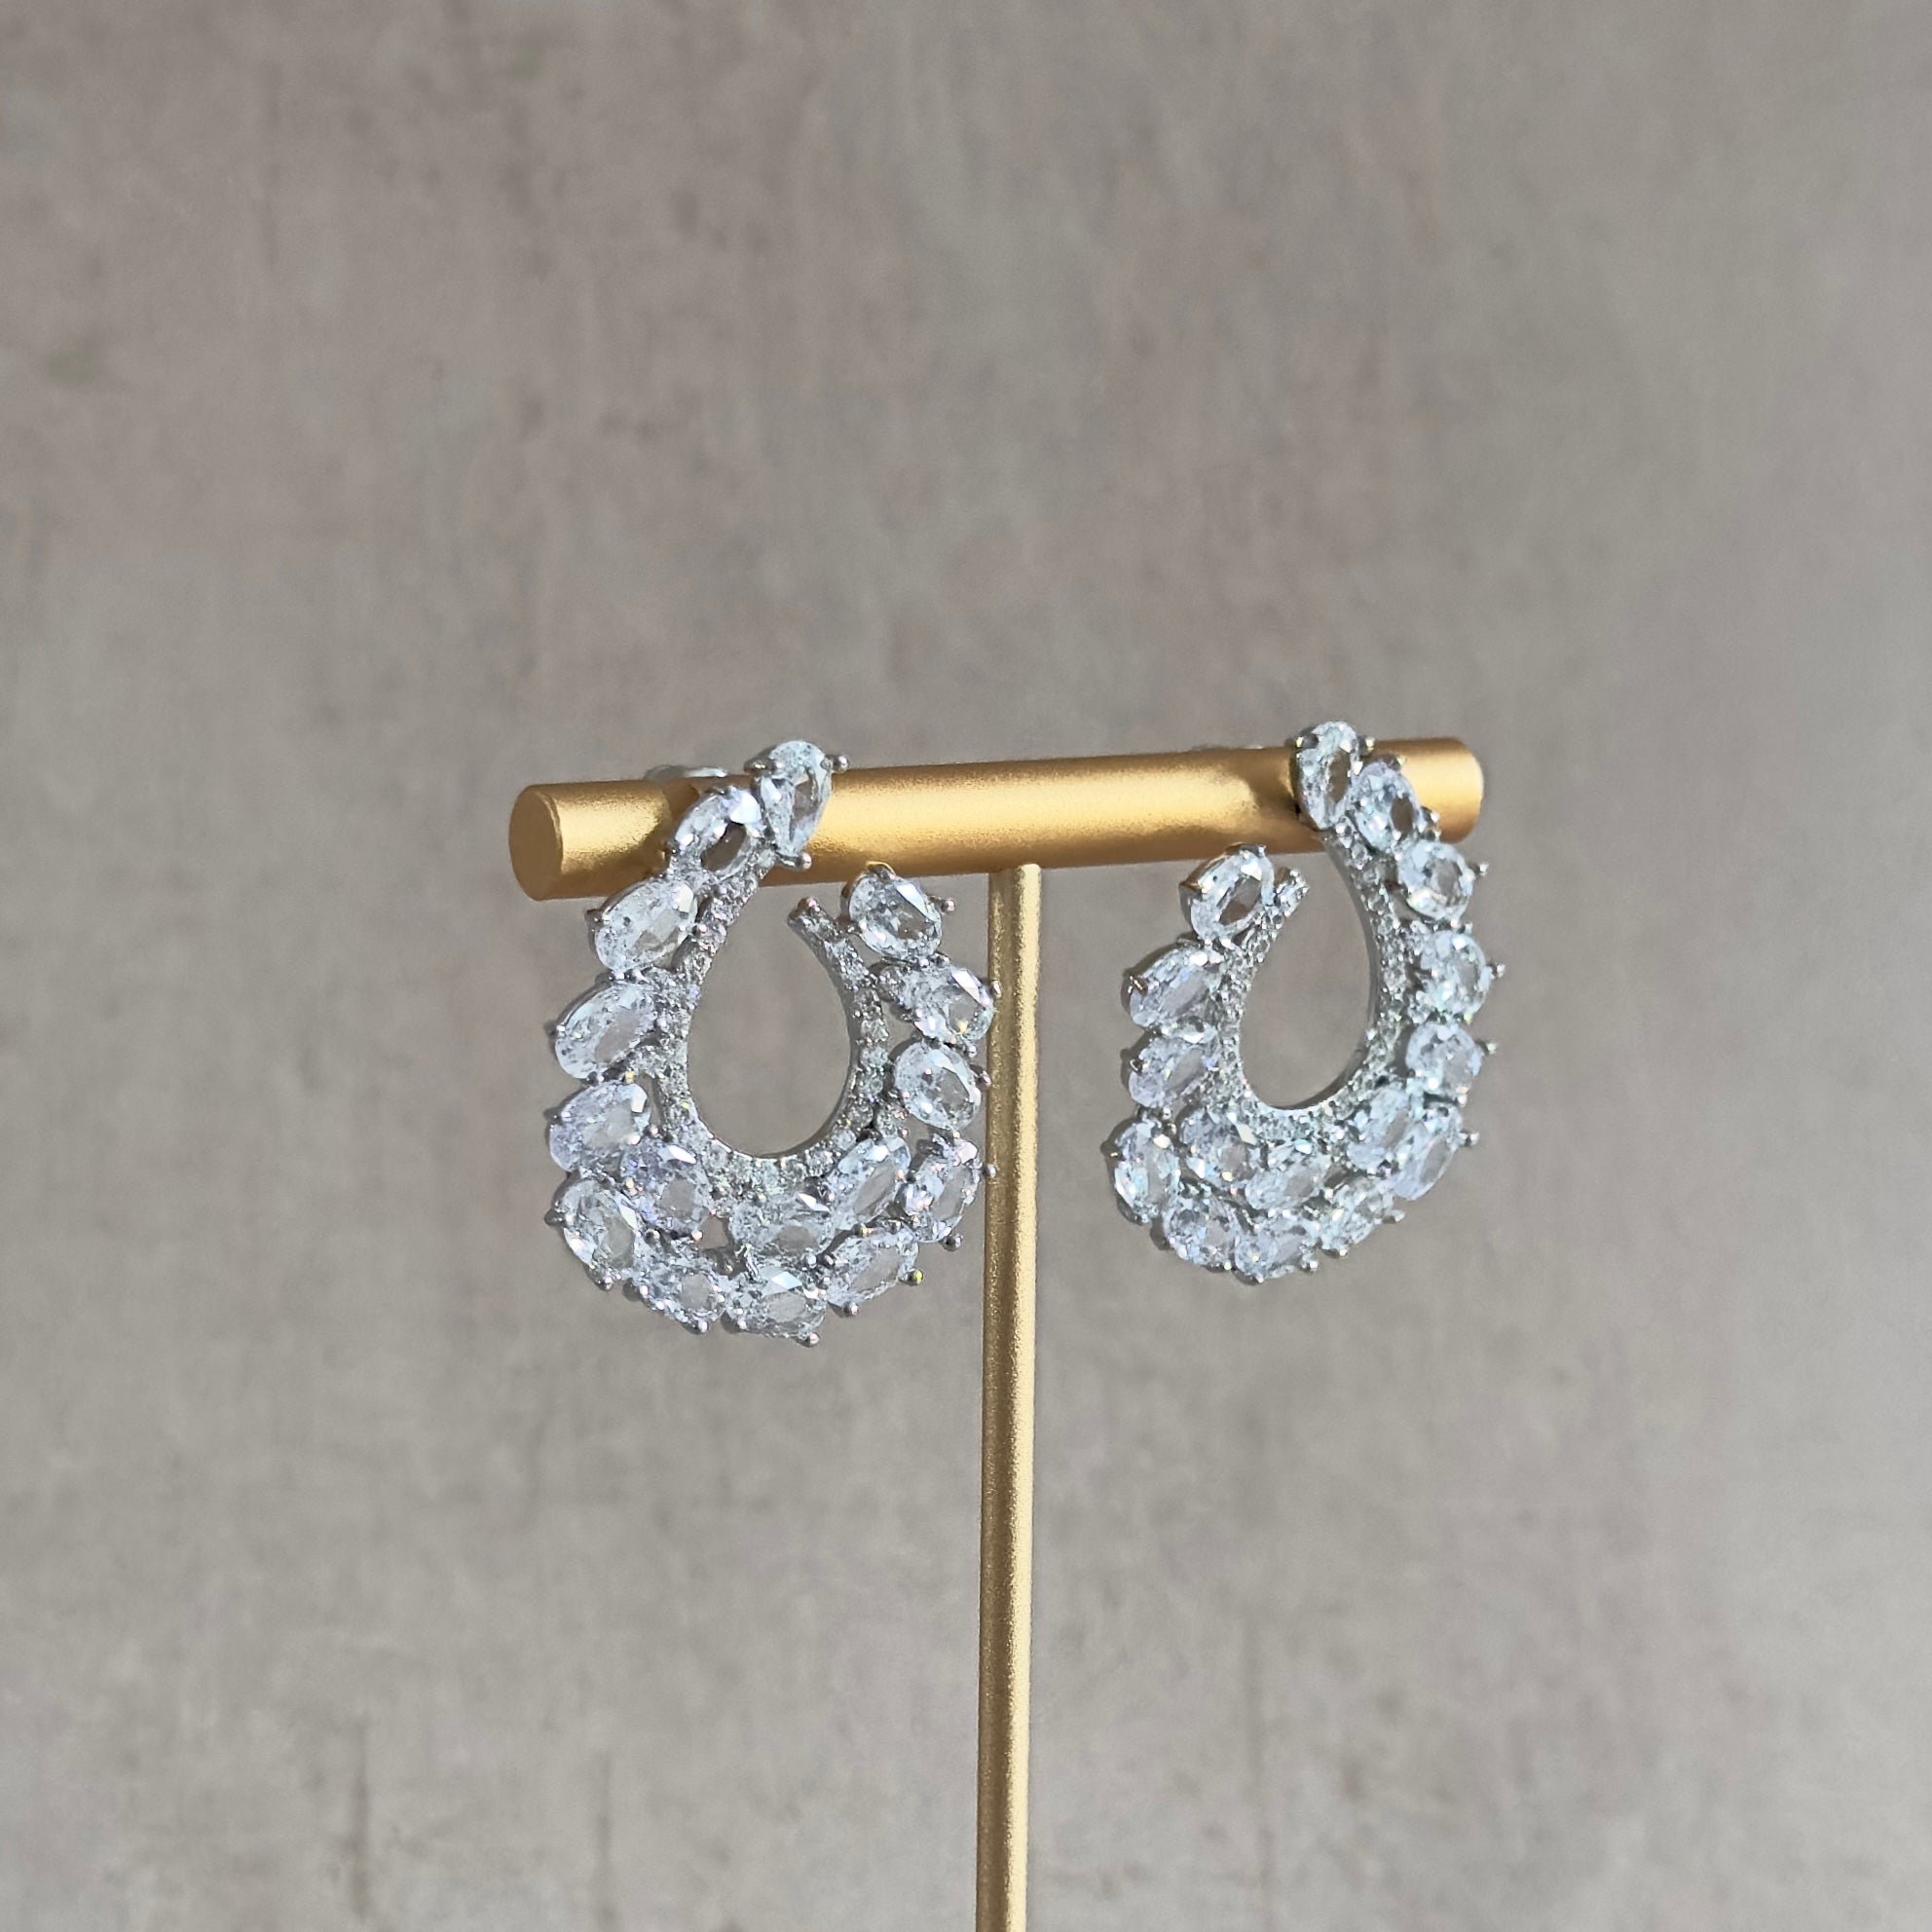 Expertly crafted with stunning crystal zirconia and a luxurious silver polish, the Taiba Crystal Earrings are the perfect accessory for any occasion. With their sparkling beauty and elegant design, these earrings are sure to elevate any outfit.